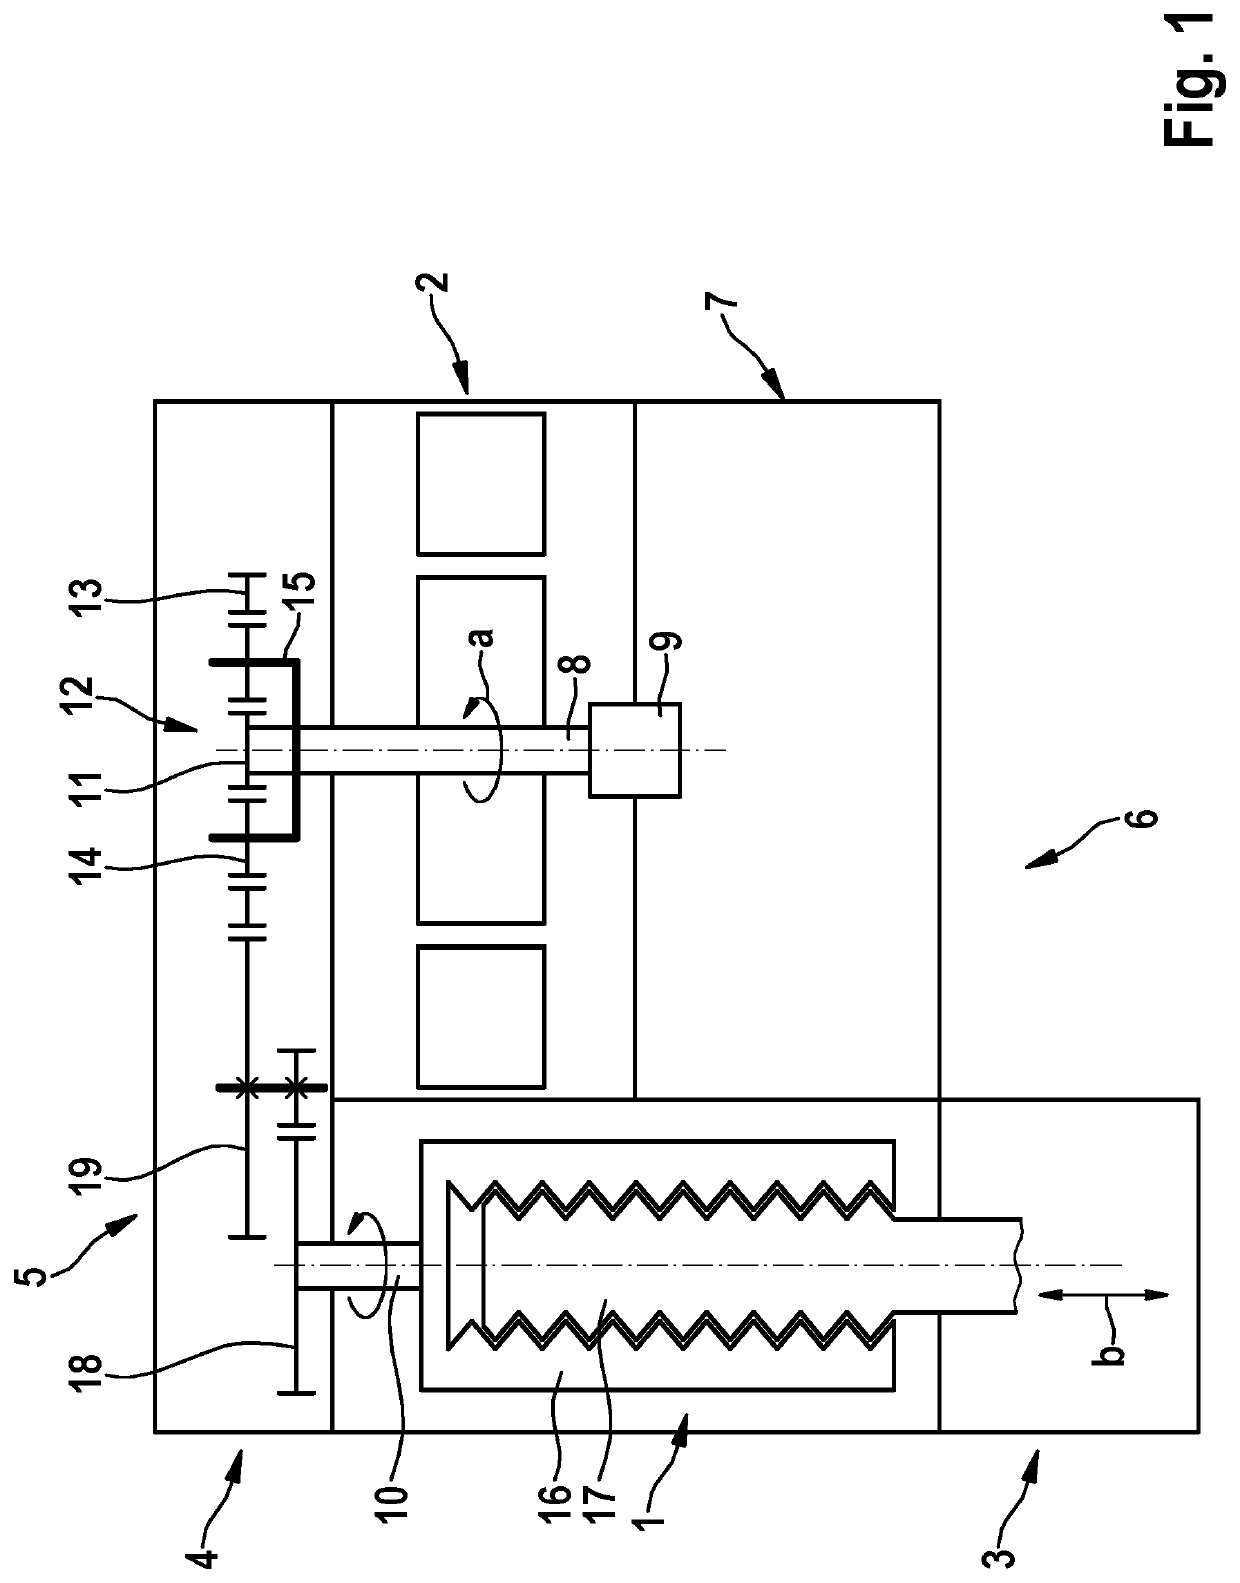 Electromechanical brake pressure generator for a hydraulic brake system of a vehicle